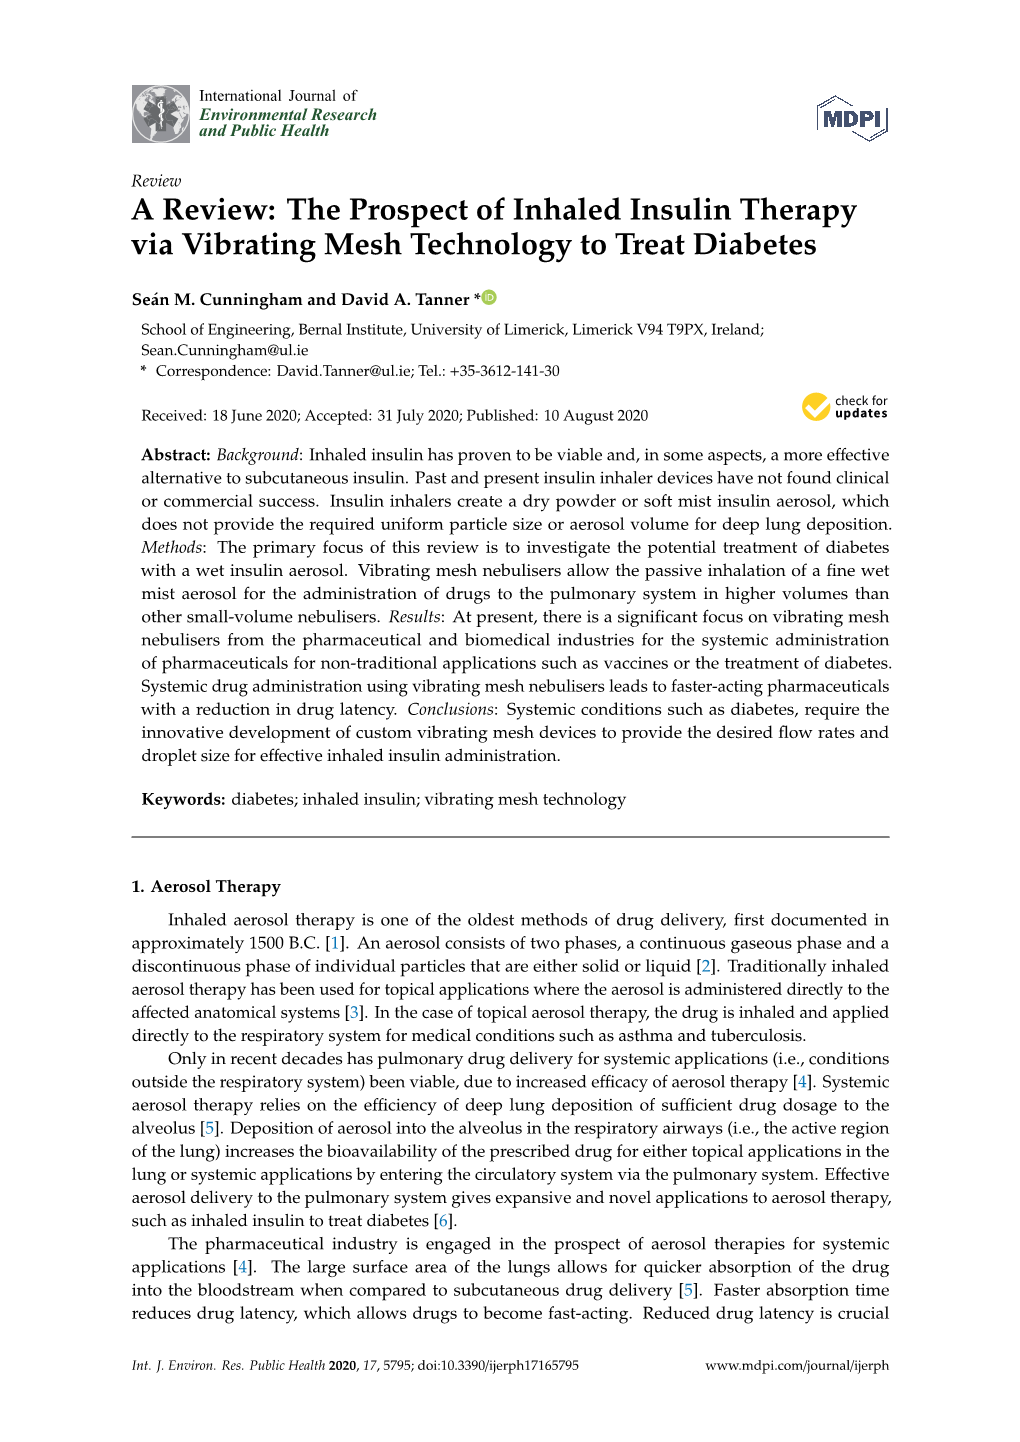 The Prospect of Inhaled Insulin Therapy Via Vibrating Mesh Technology to Treat Diabetes